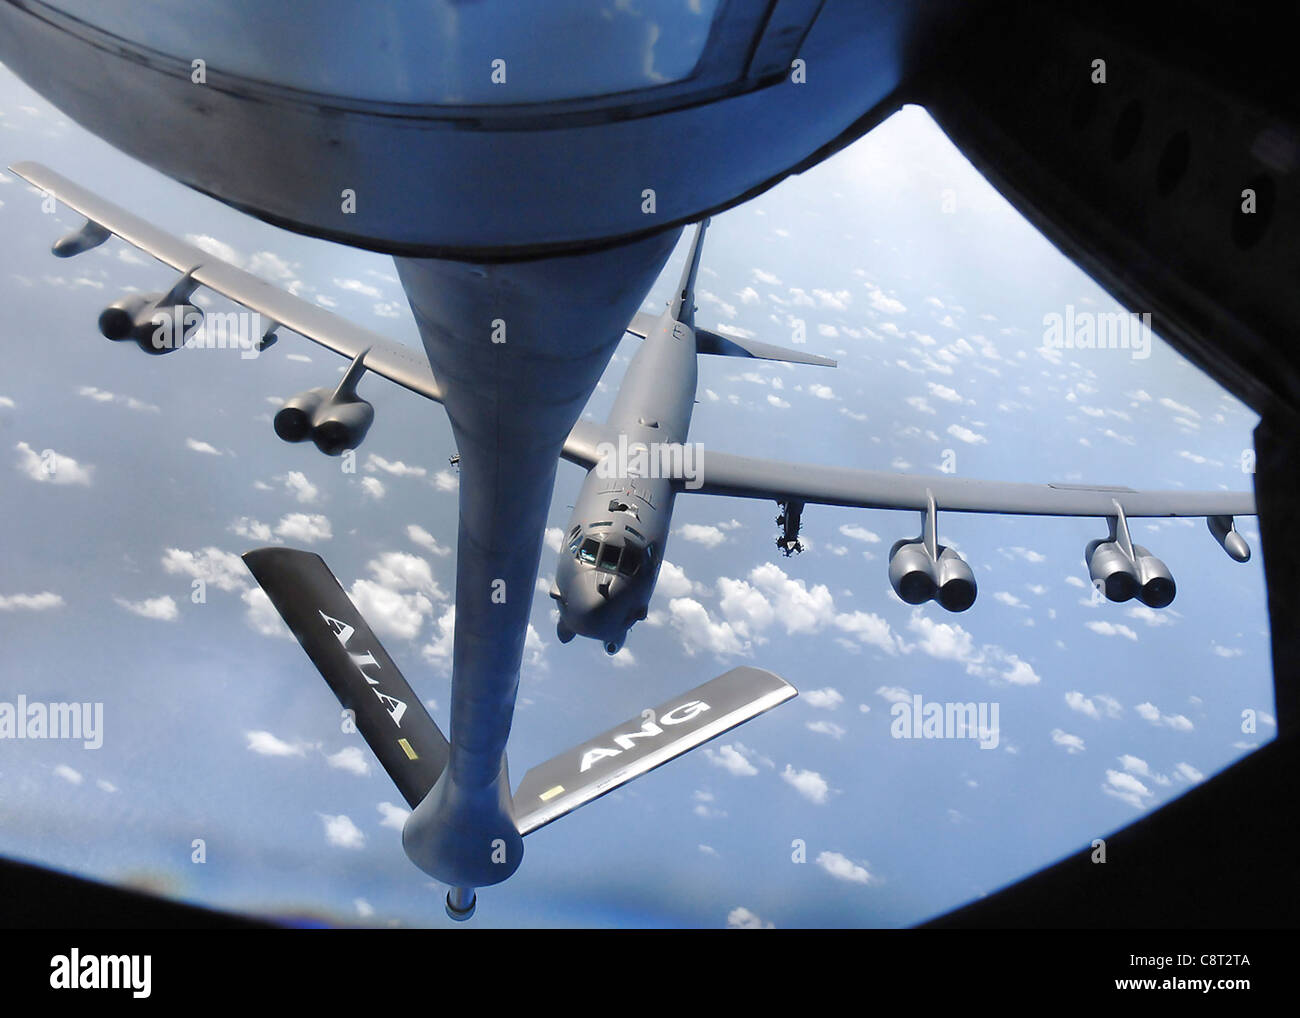 A B-52 Stratofortress prepares to receive fuel from a KC-135 Stratotanker during a practice aerial refueling mission March 19 near the Mariana Islands. The KC-135 is from the 106th Air Refueling Squadron of the Alabama Air National Guard and the B-52 is assigned to the 96th Expeditionary Bomb Squadron from Barksdale AFB, La. Stock Photo